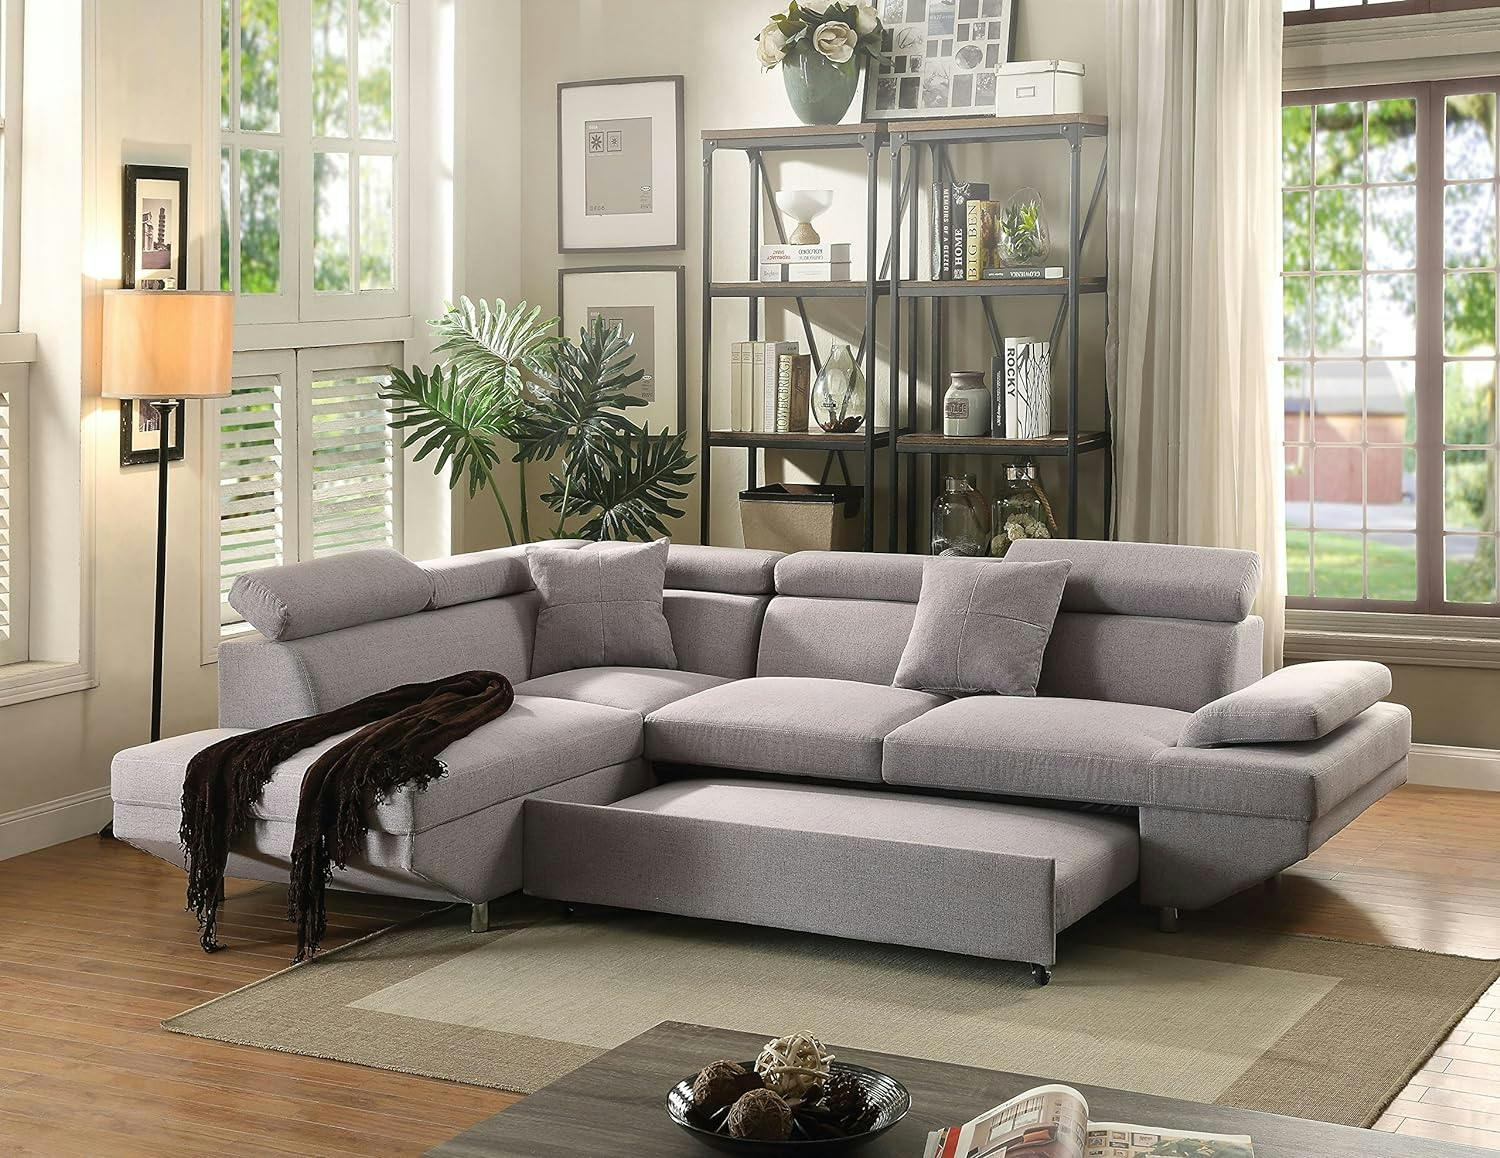 Cozy Gray Fabric Two-Piece Sectional Sofa with Wood Accents